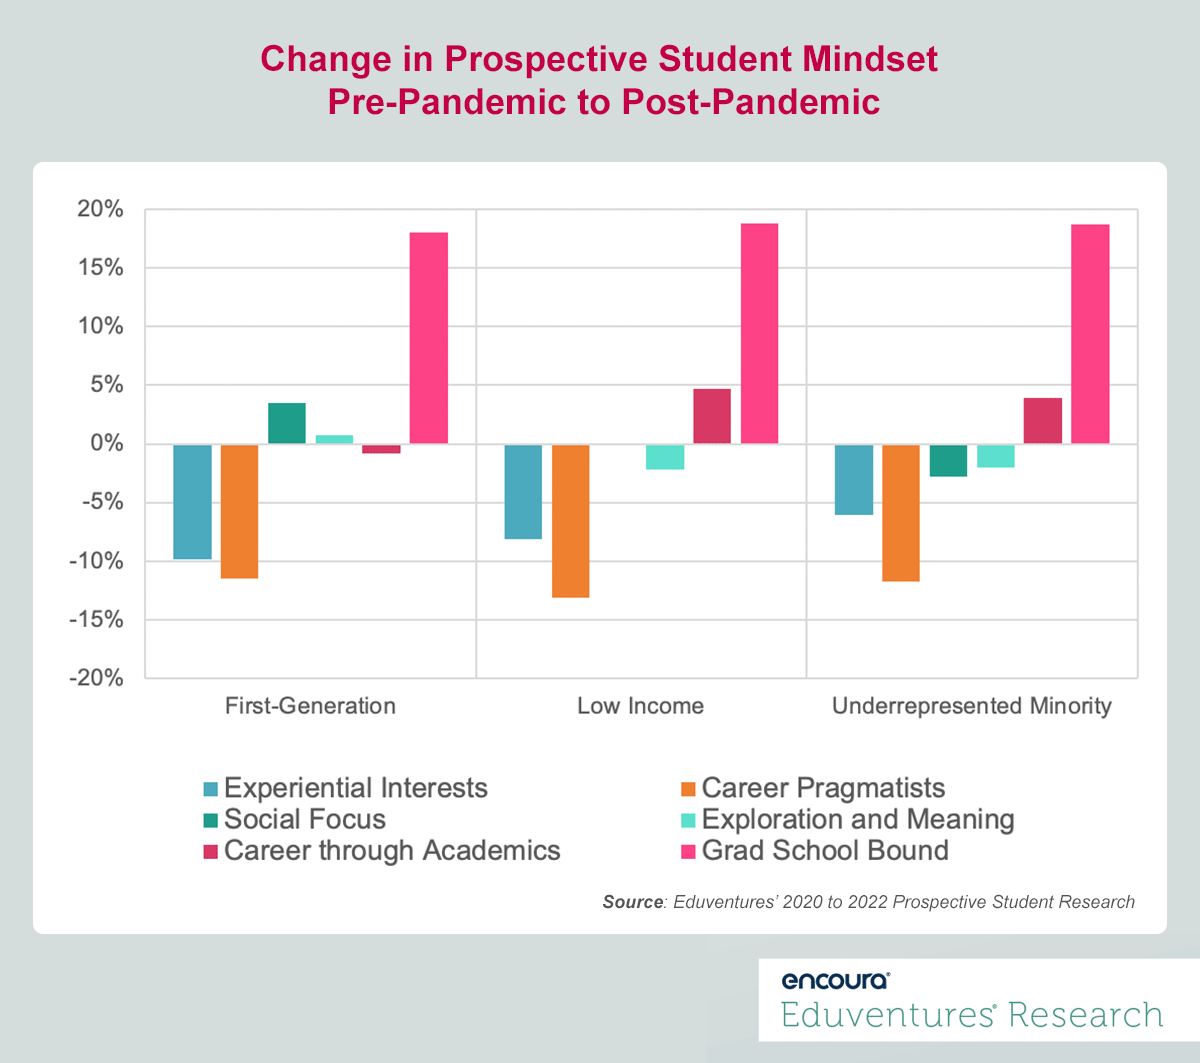 Change in Prospective Student Mindset Pre-Pandemic to Post-Pandemic